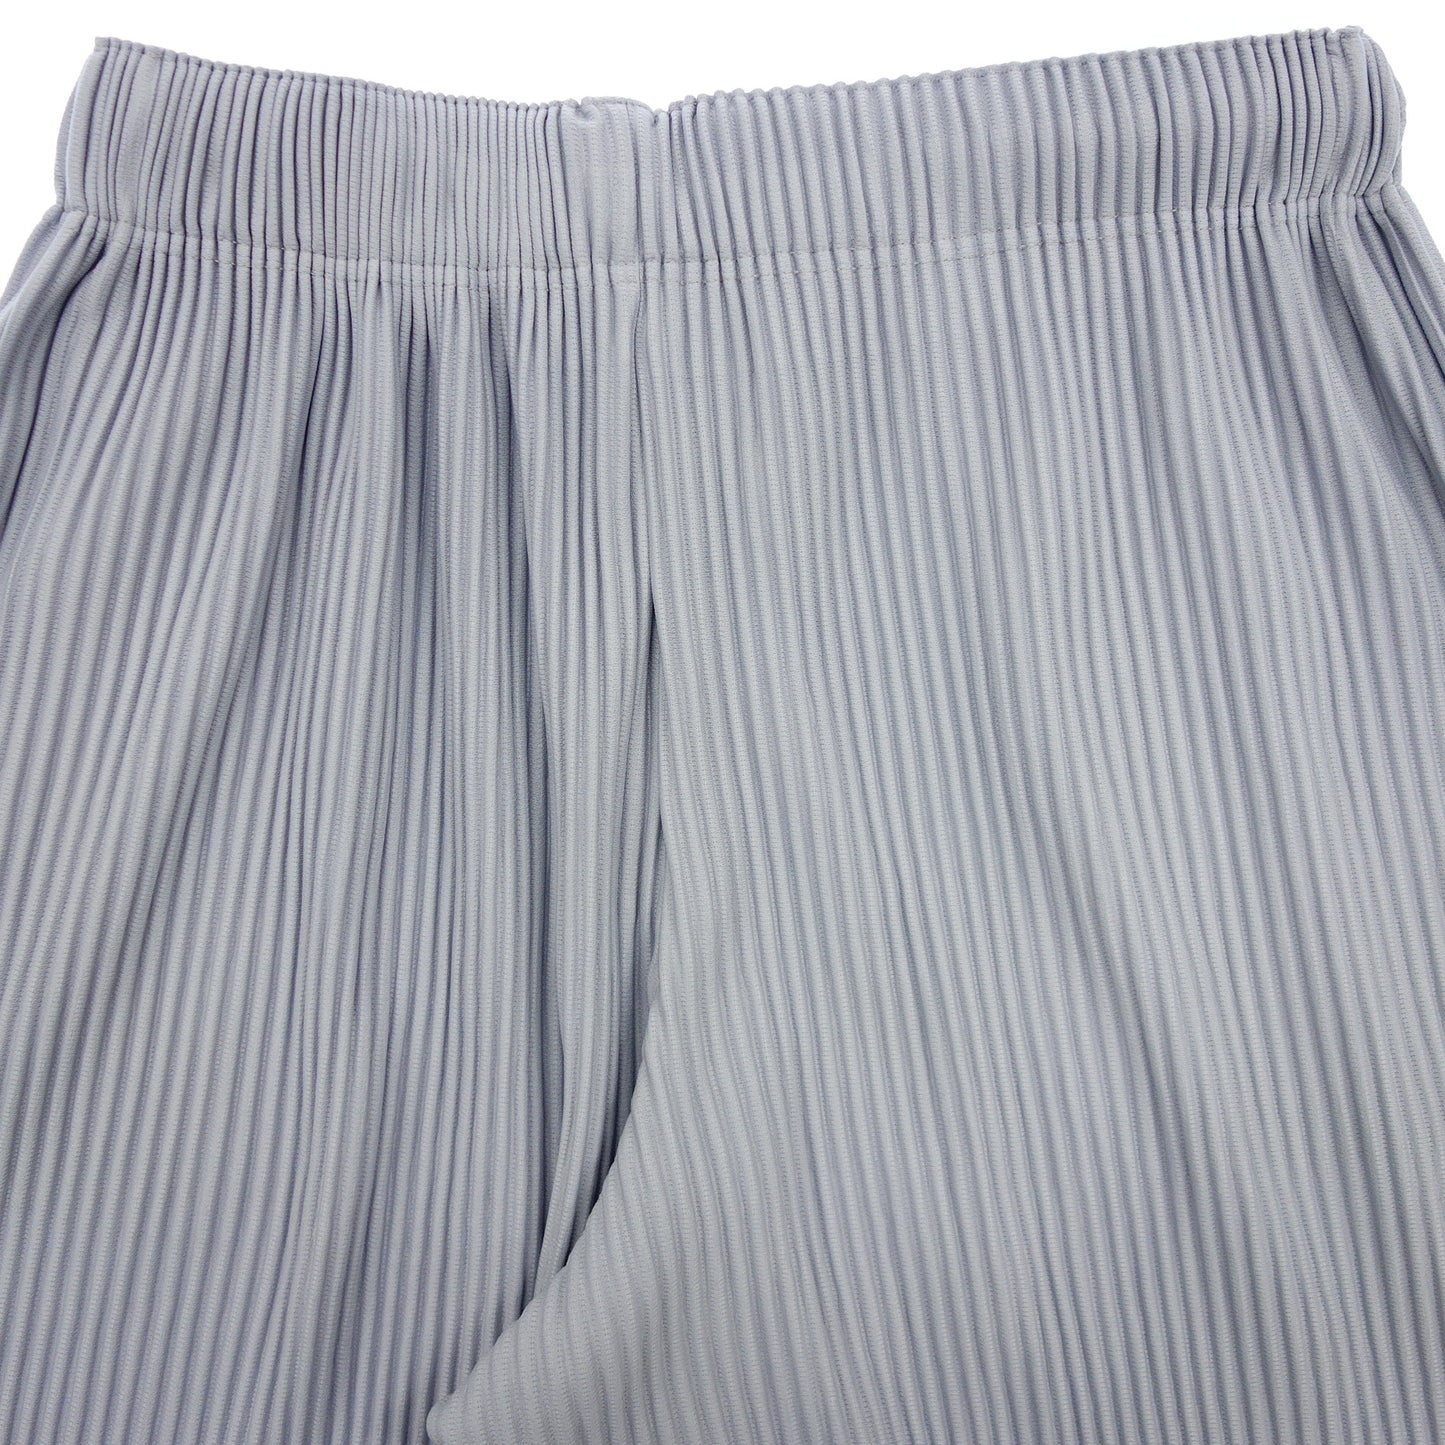 Good Condition◆Issey Miyake Homme Plisse Short Pants Pleated HP91JF126 Men's Size 3 Gray ISSEY MIYAKE HOMME PLISSE [AFB30] 